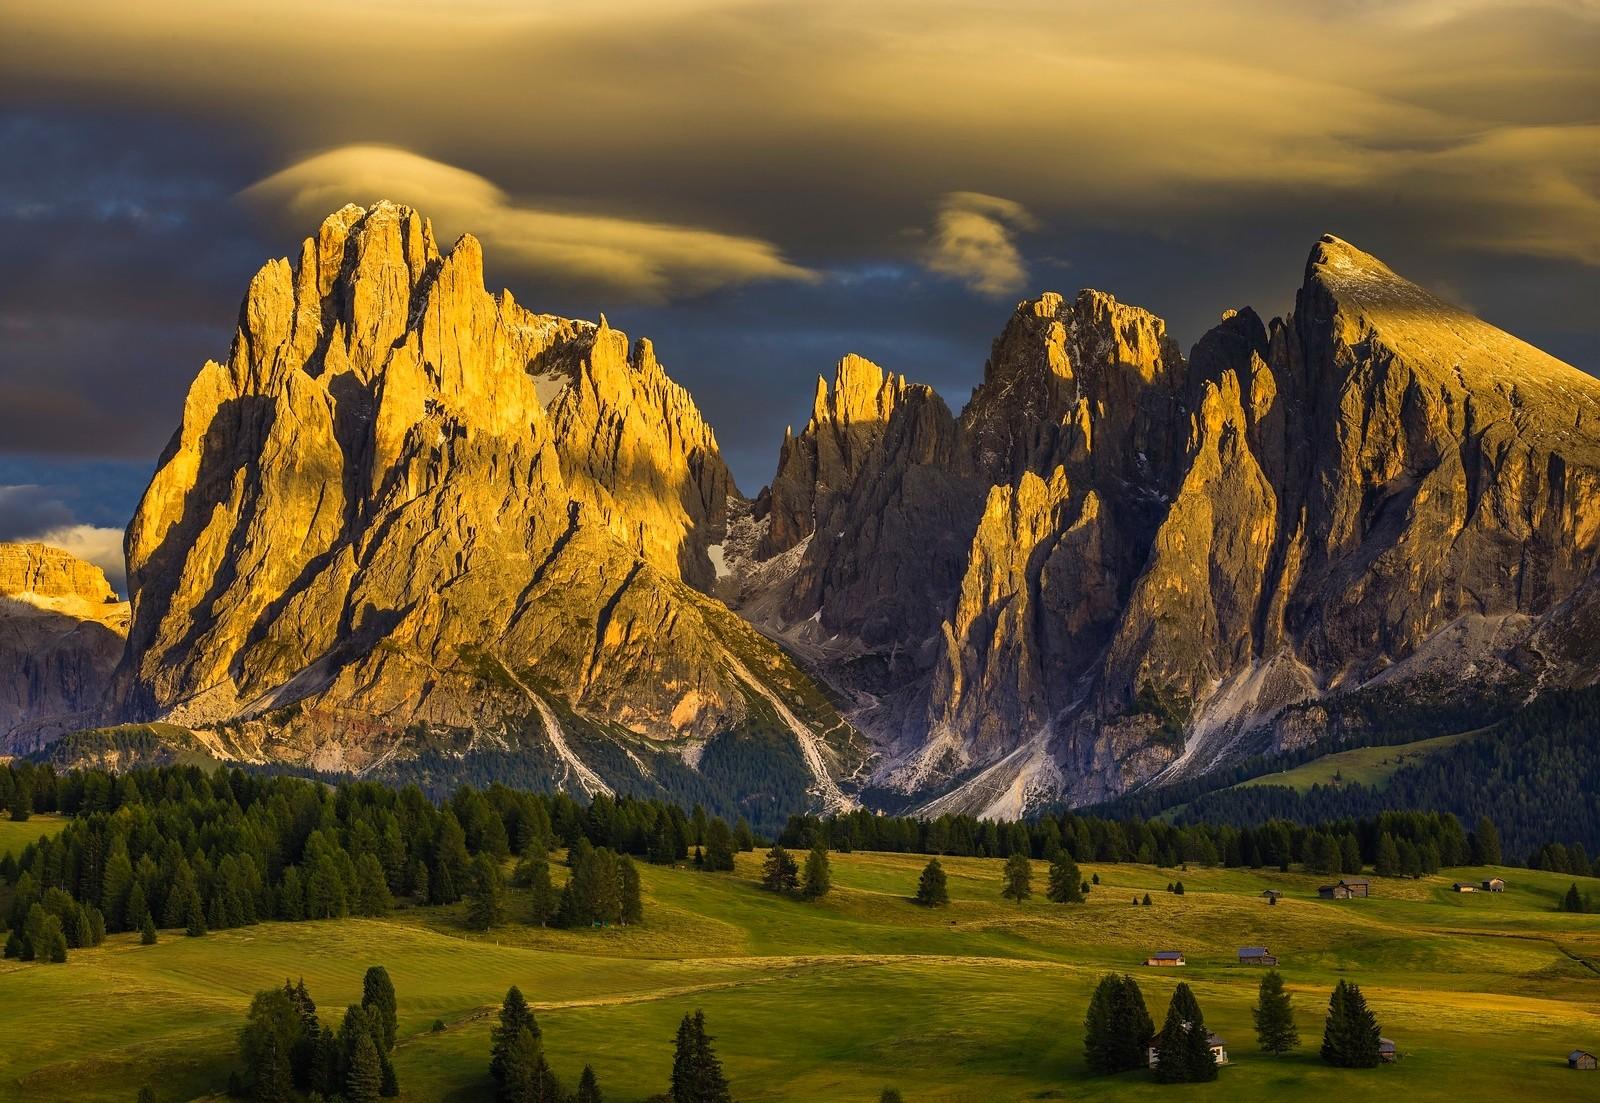 #green, #clouds, #Alps, #nature, #mountains, #Dolomites